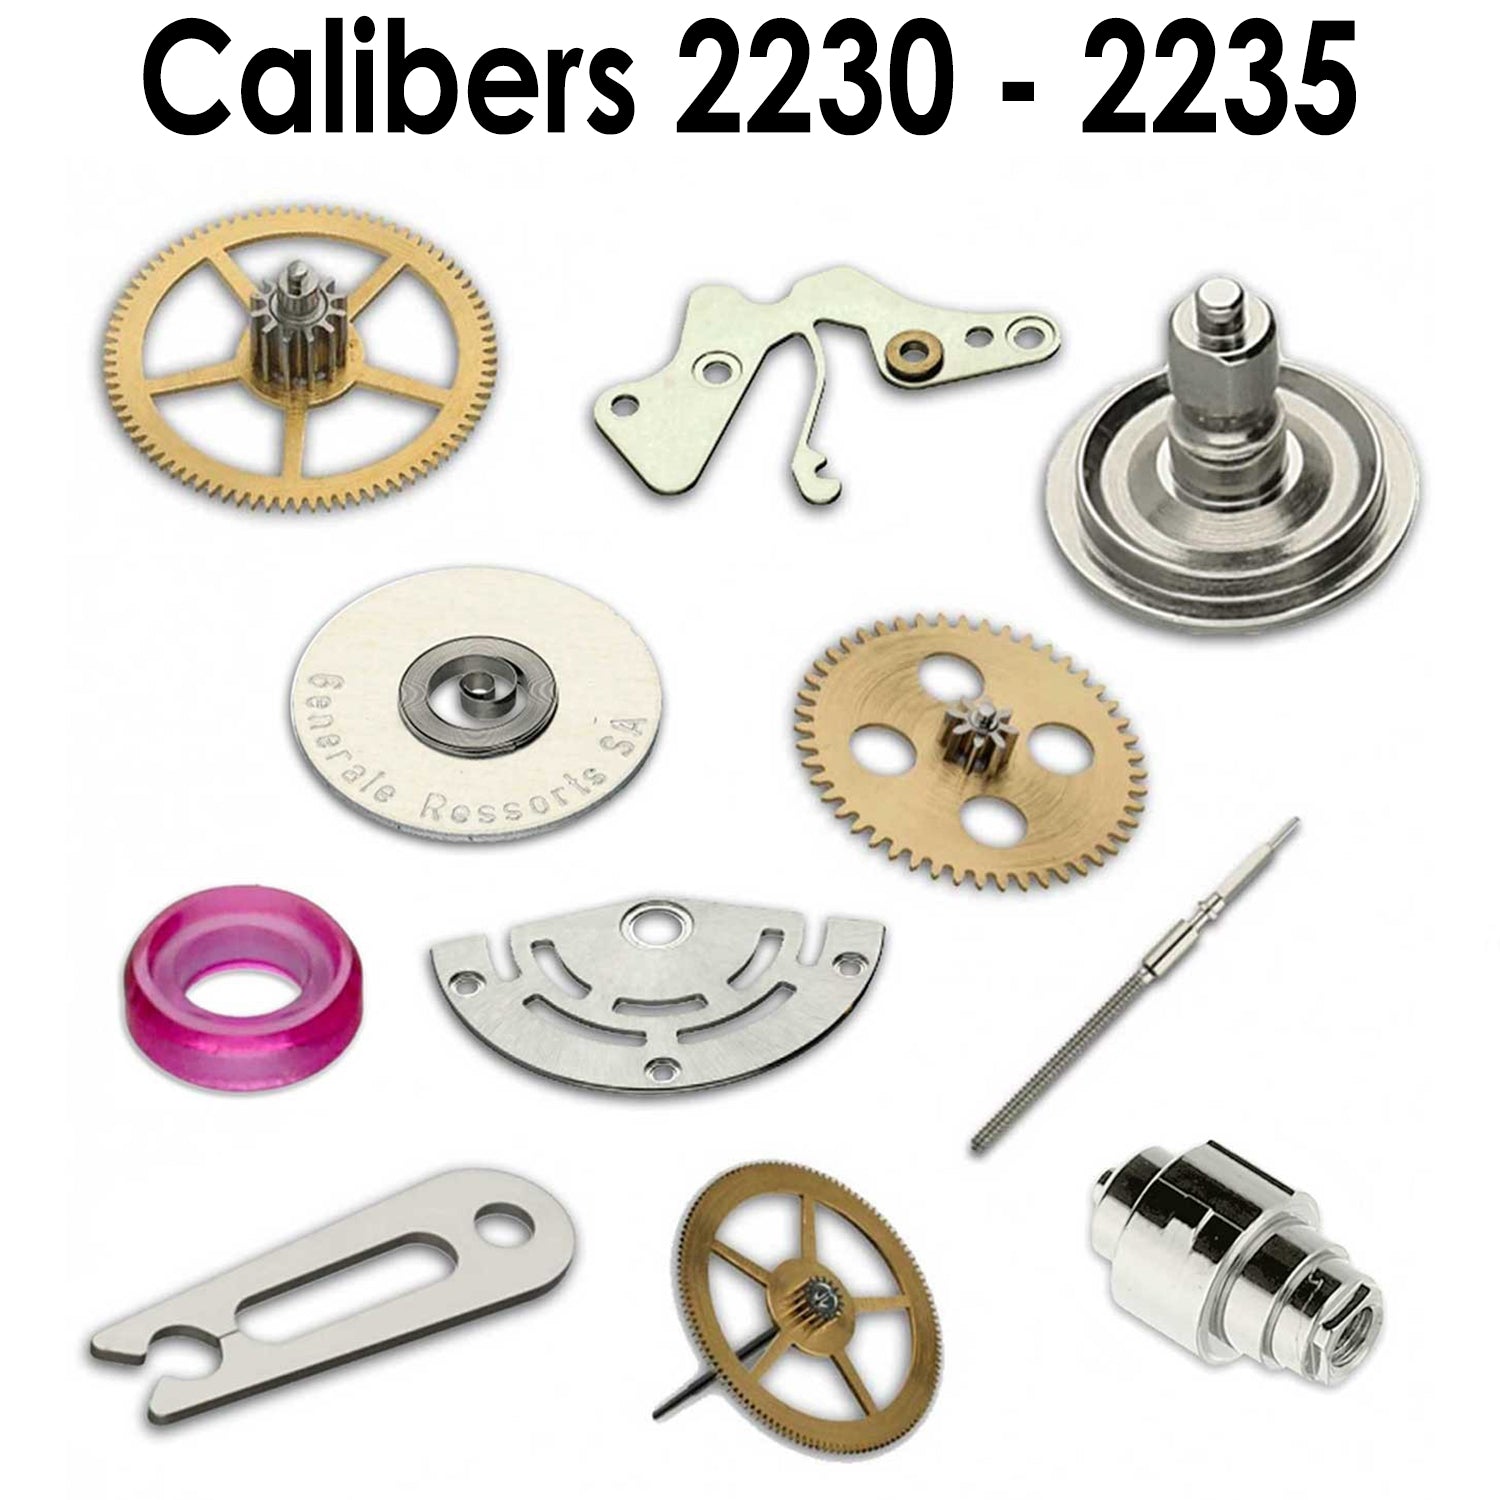 Internal Parts to fit Rolex 22 Series Calibers 2230 - 2235